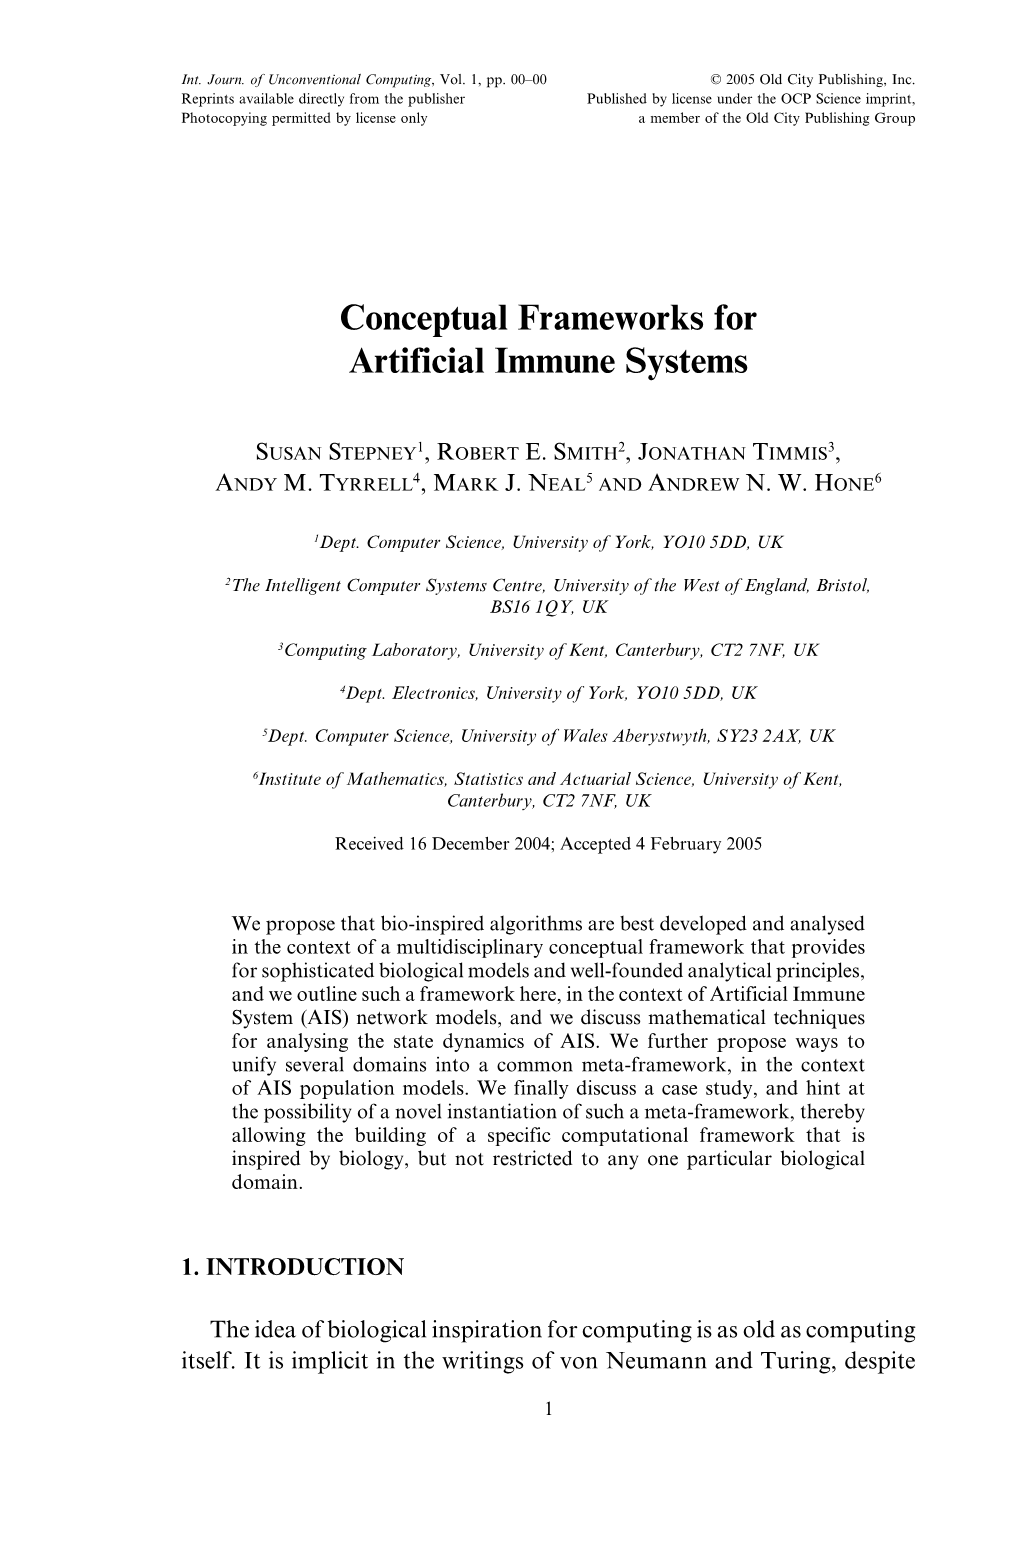 Conceptual Frameworks for Artificial Immune Systems